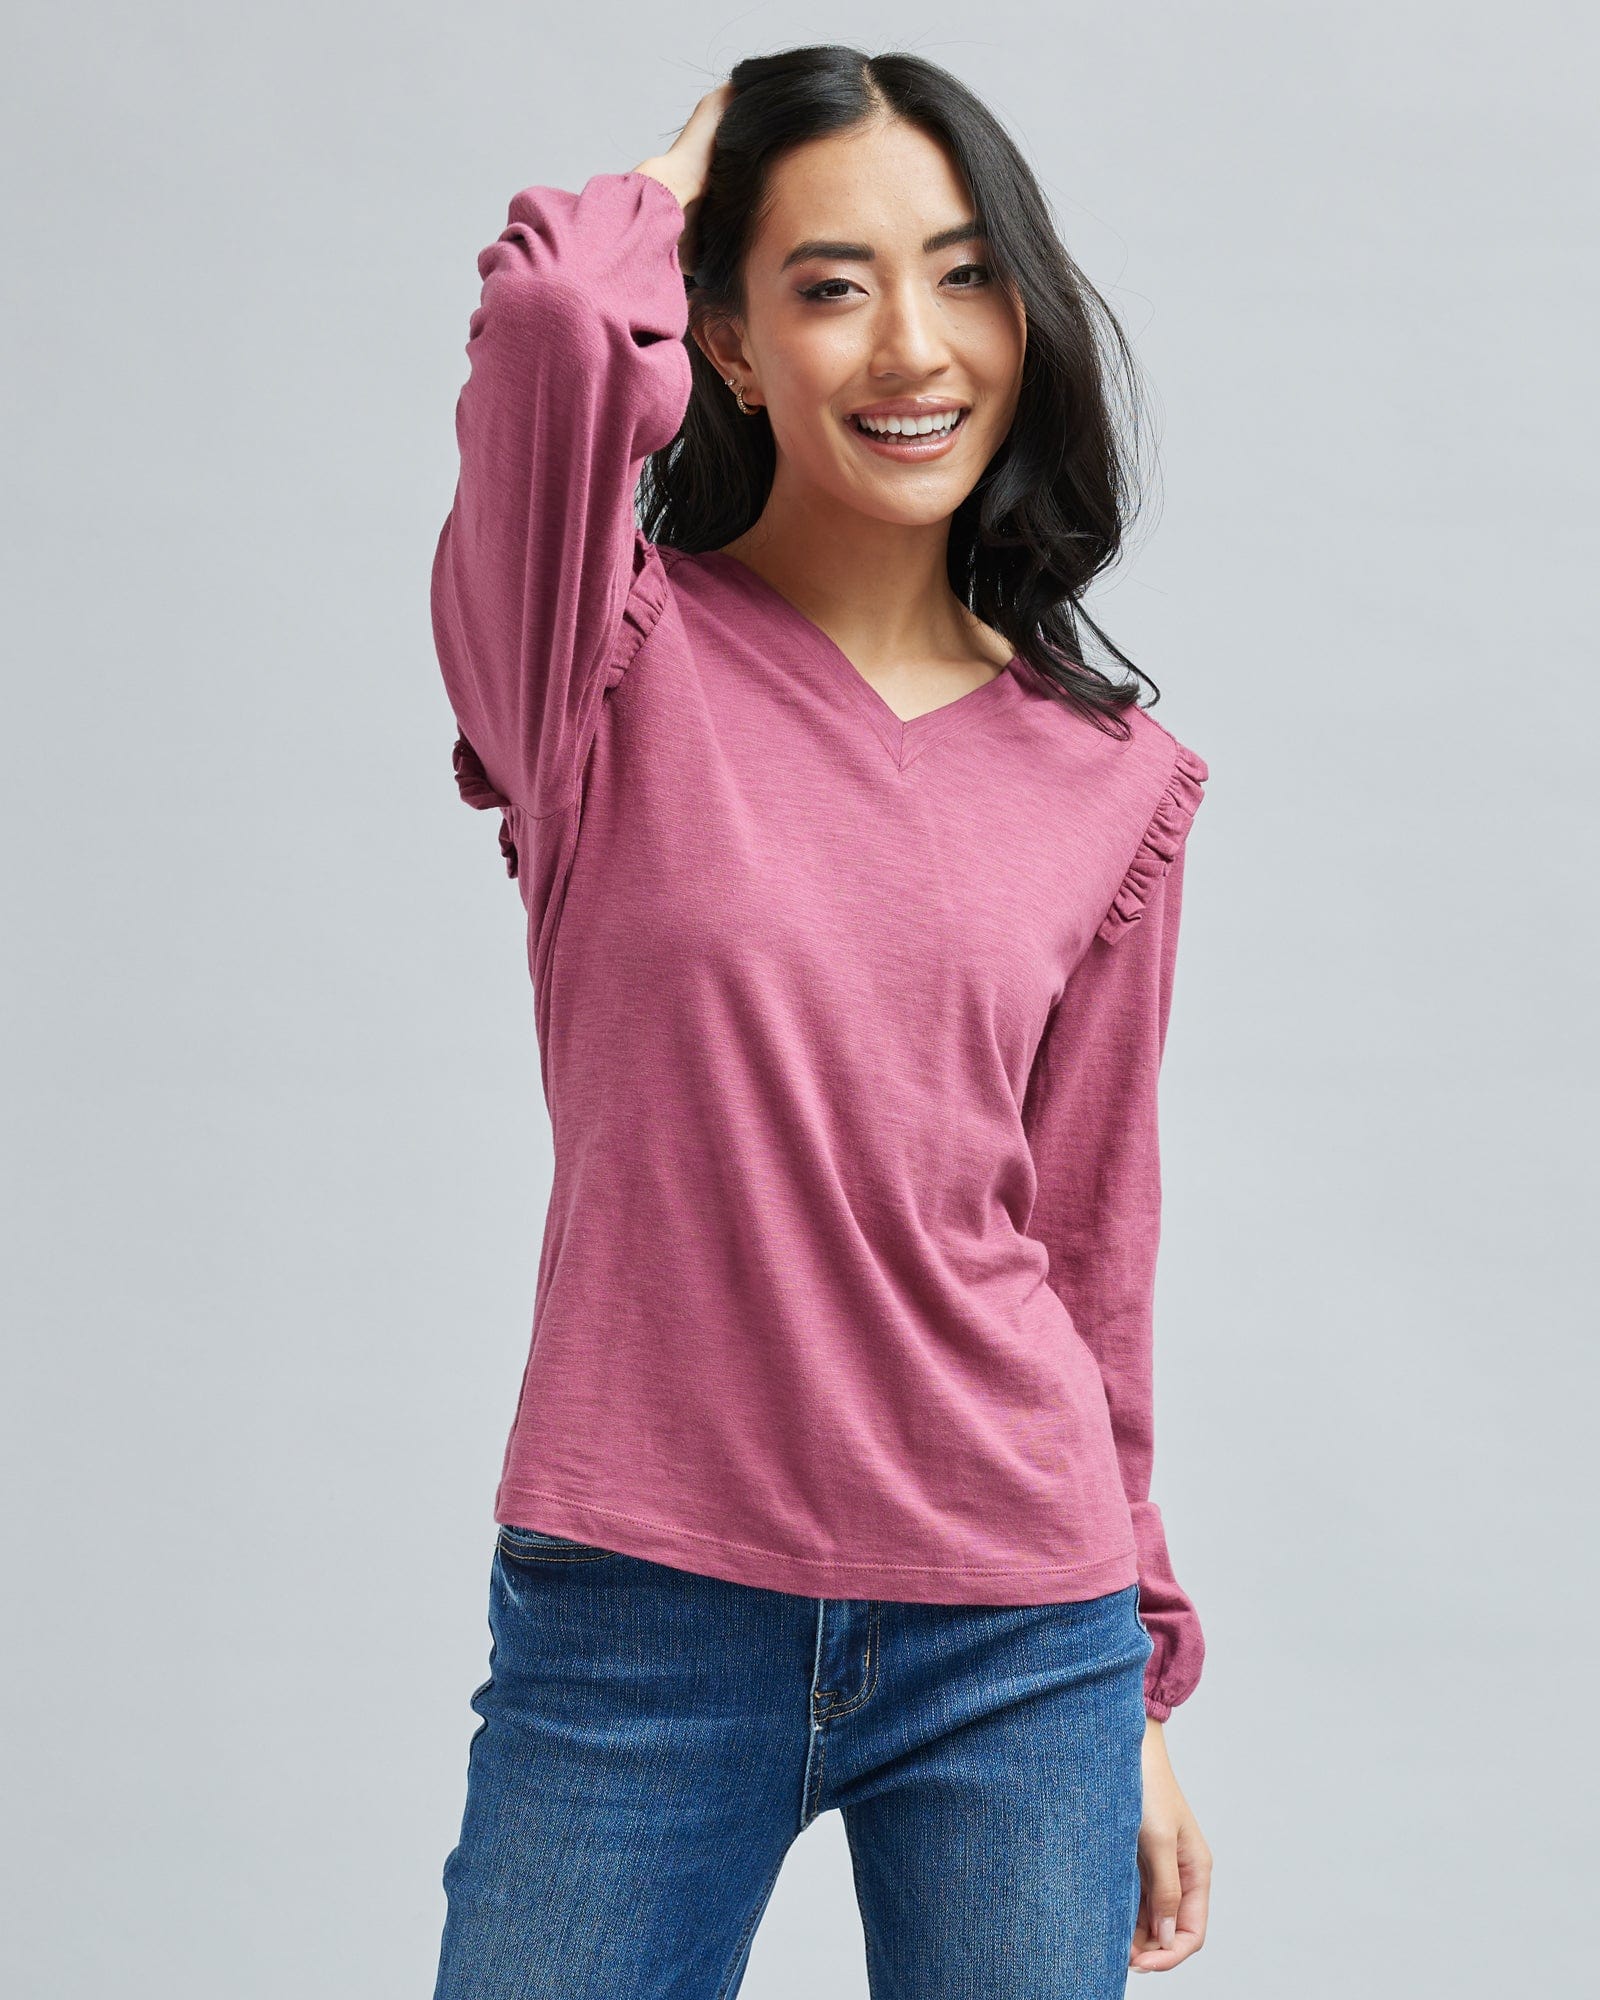 Woman in a long sleeve, pink t-shirt